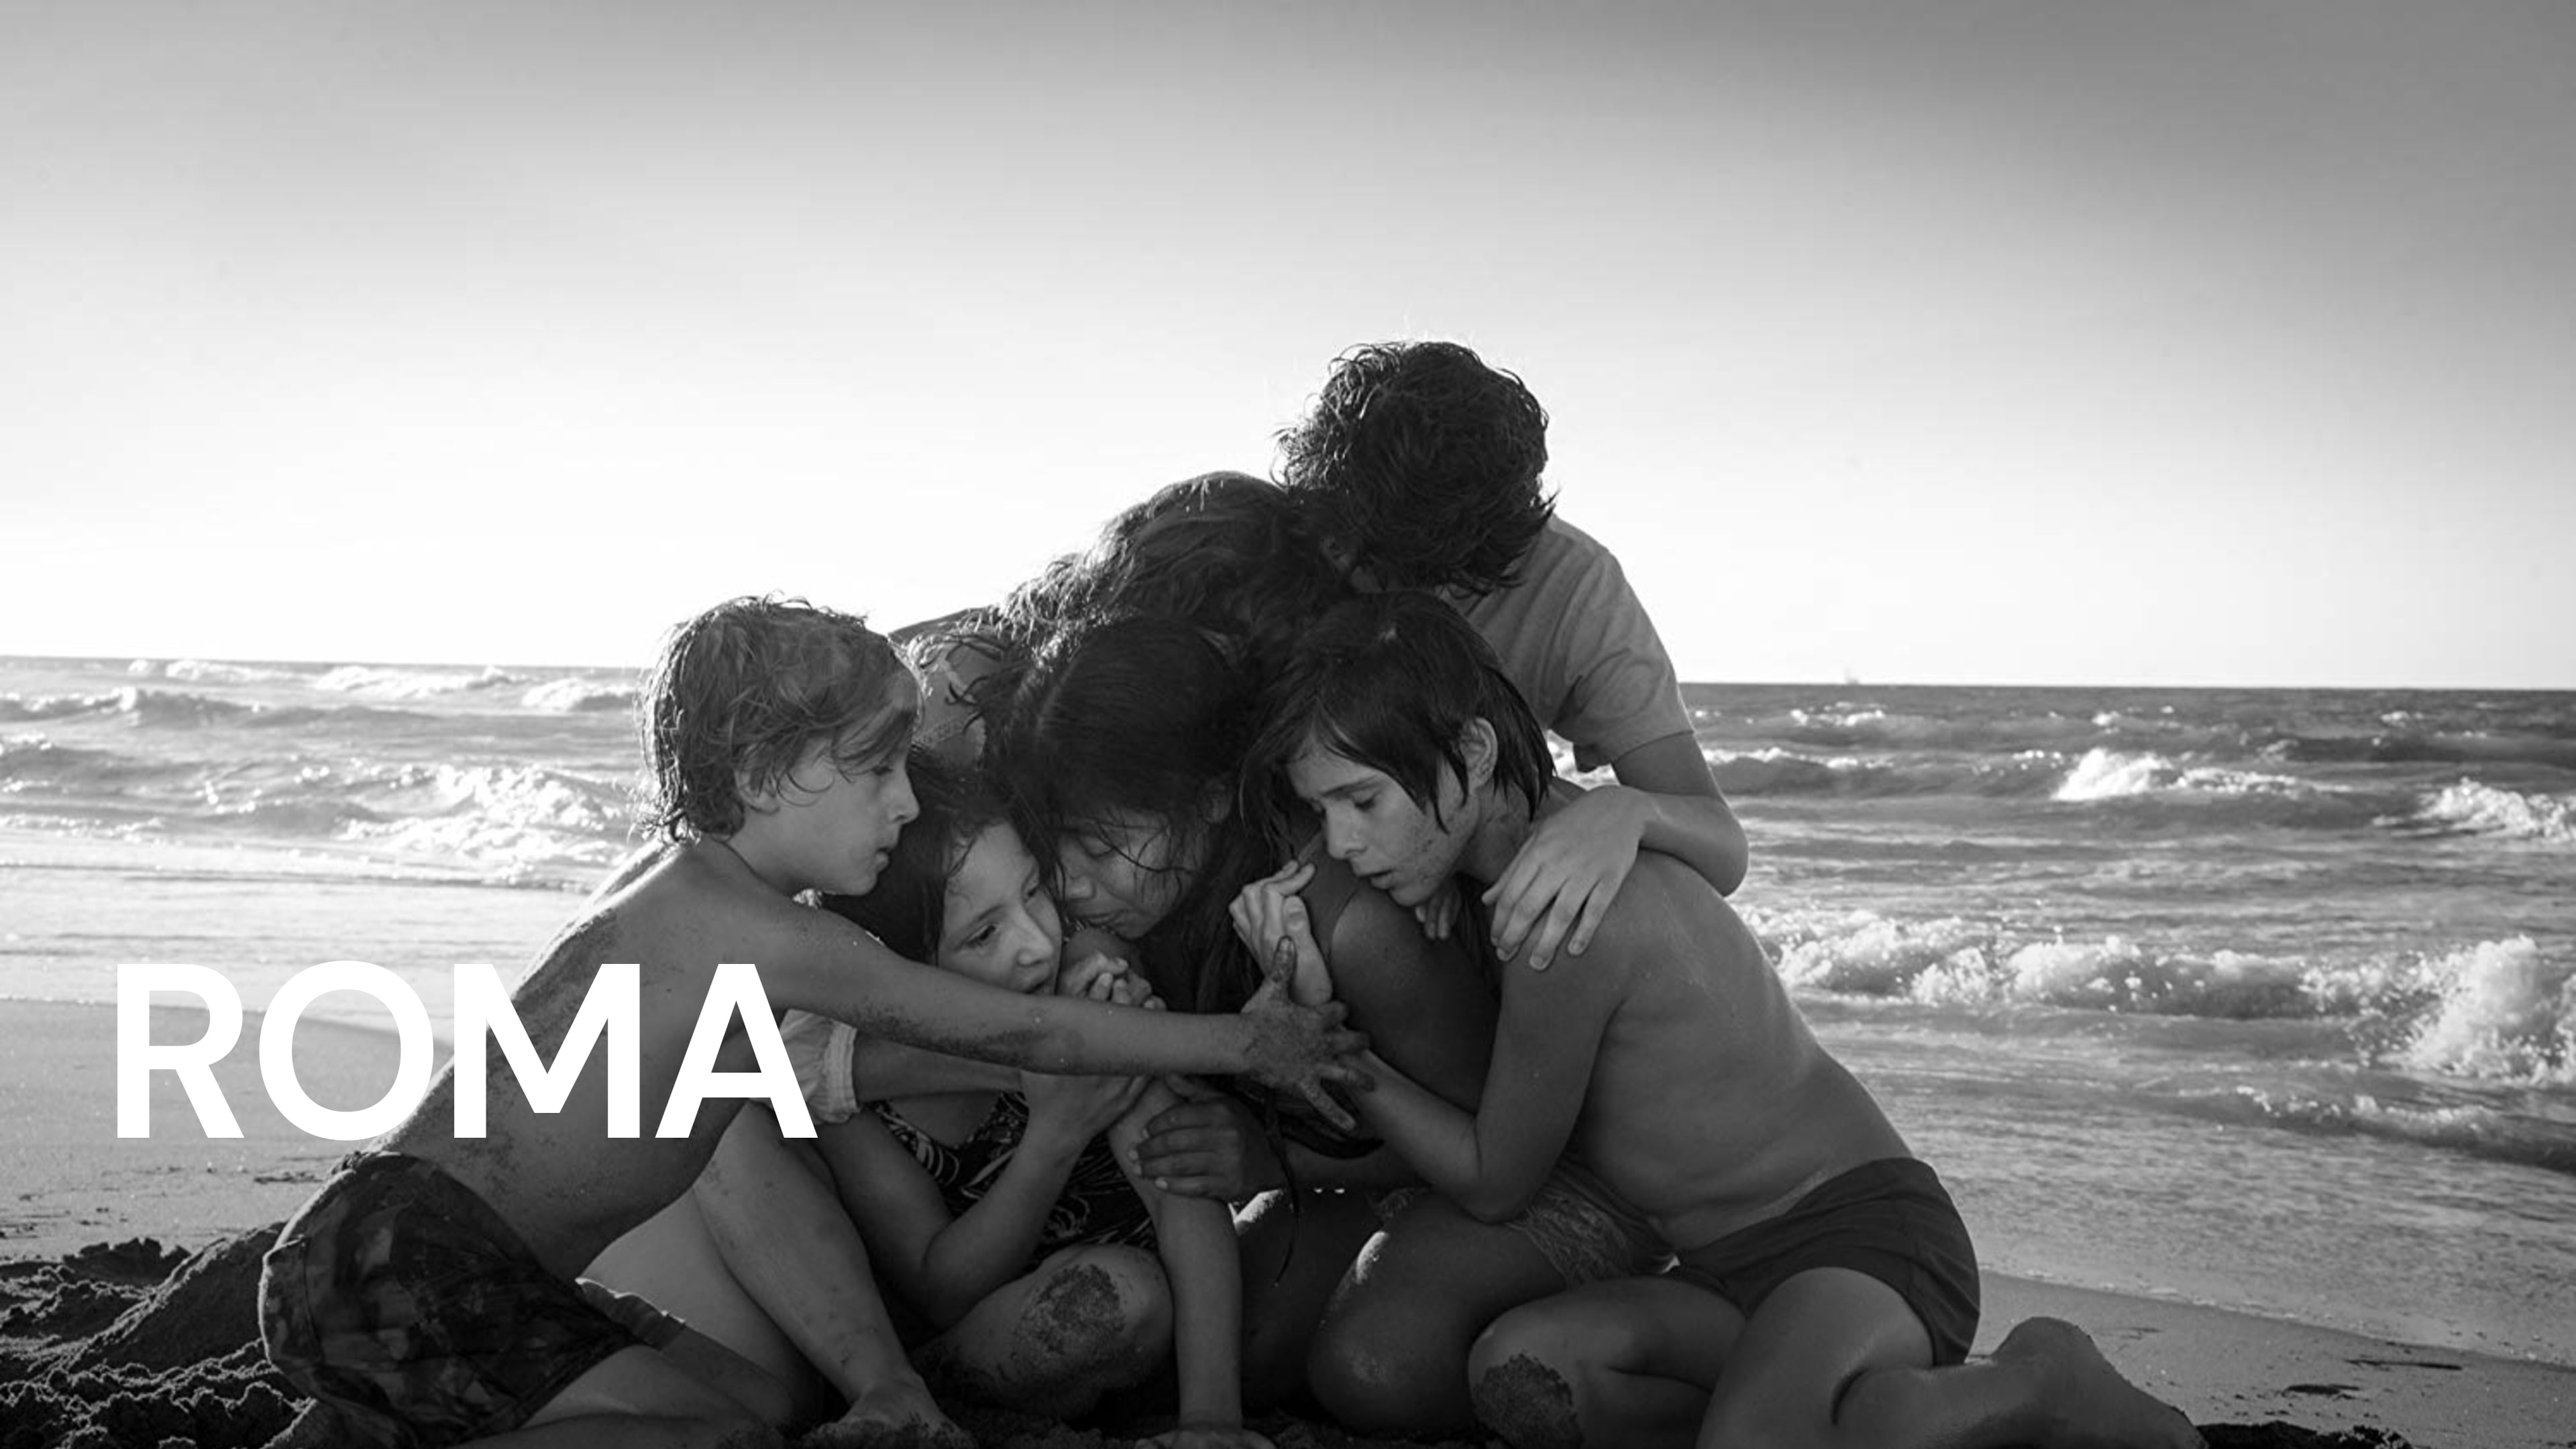 38-facts-about-the-movie-roma